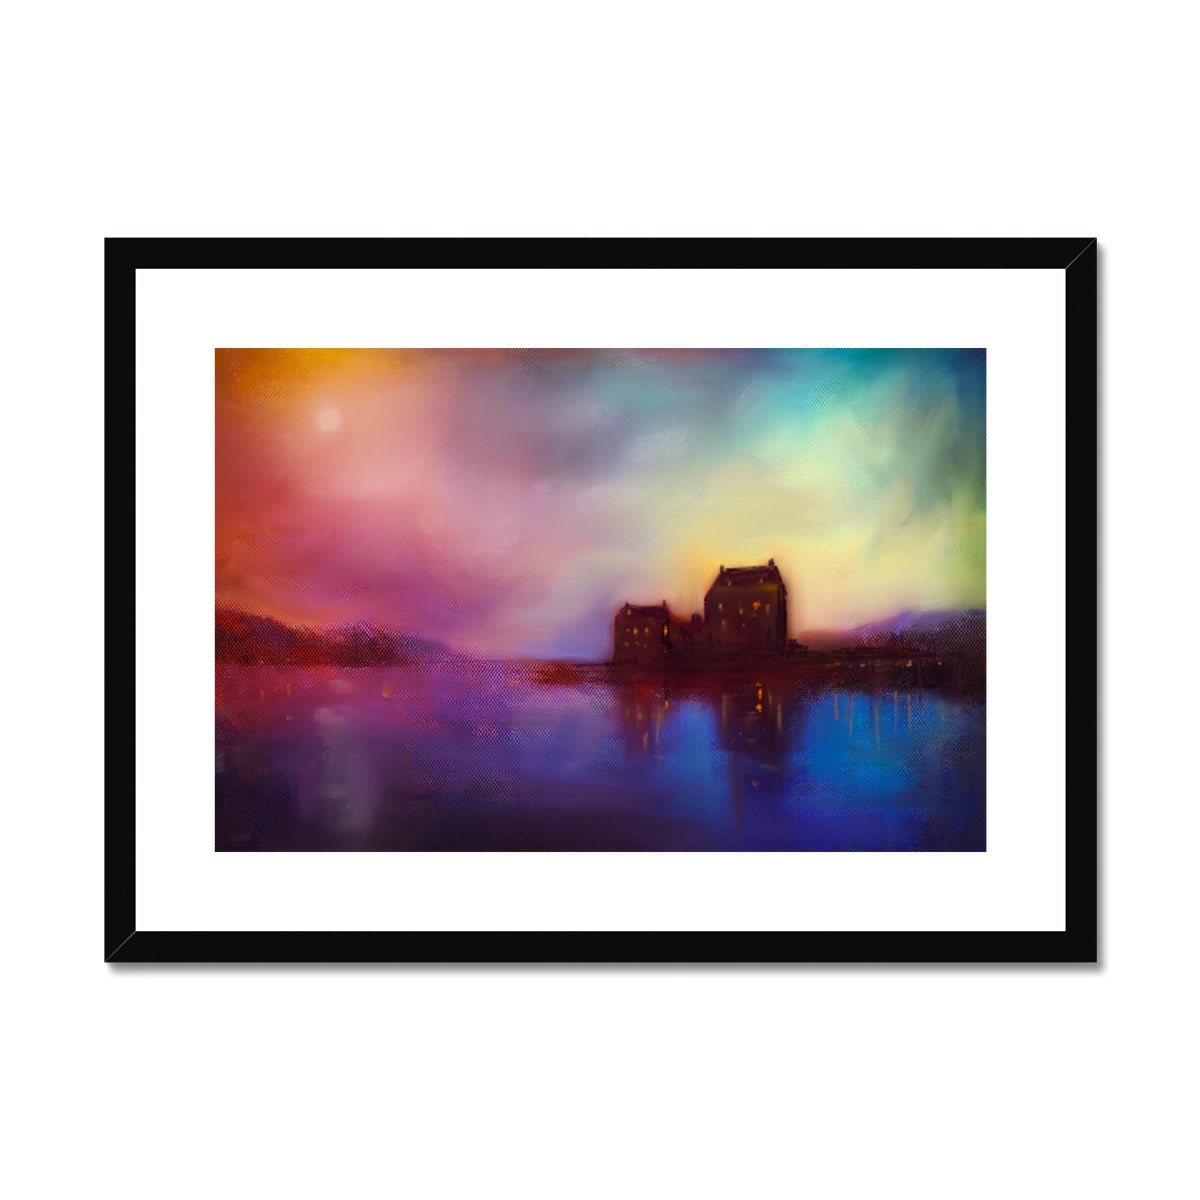 Eilean Donan Castle Sunset Painting | Framed & Mounted Prints From Scotland-Framed & Mounted Prints-Historic & Iconic Scotland Art Gallery-A2 Landscape-Black Frame-Paintings, Prints, Homeware, Art Gifts From Scotland By Scottish Artist Kevin Hunter